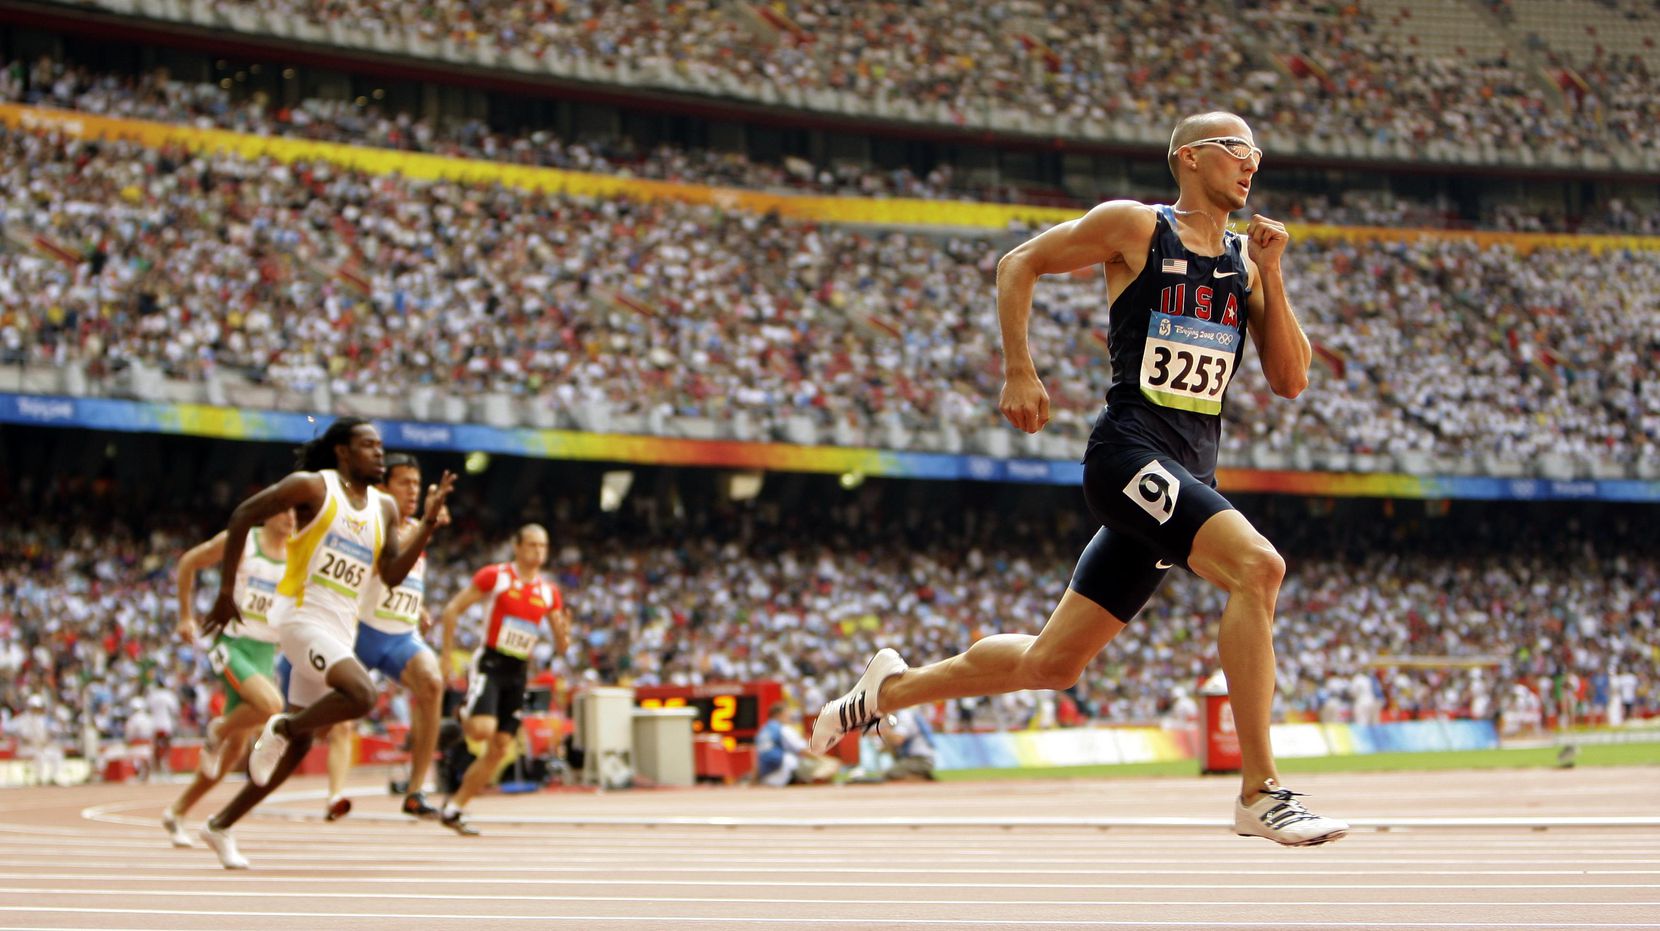 2008 Beijing Olympics: Jeremy Wariner easily wins his heat in Round 1 of the Men's 400...